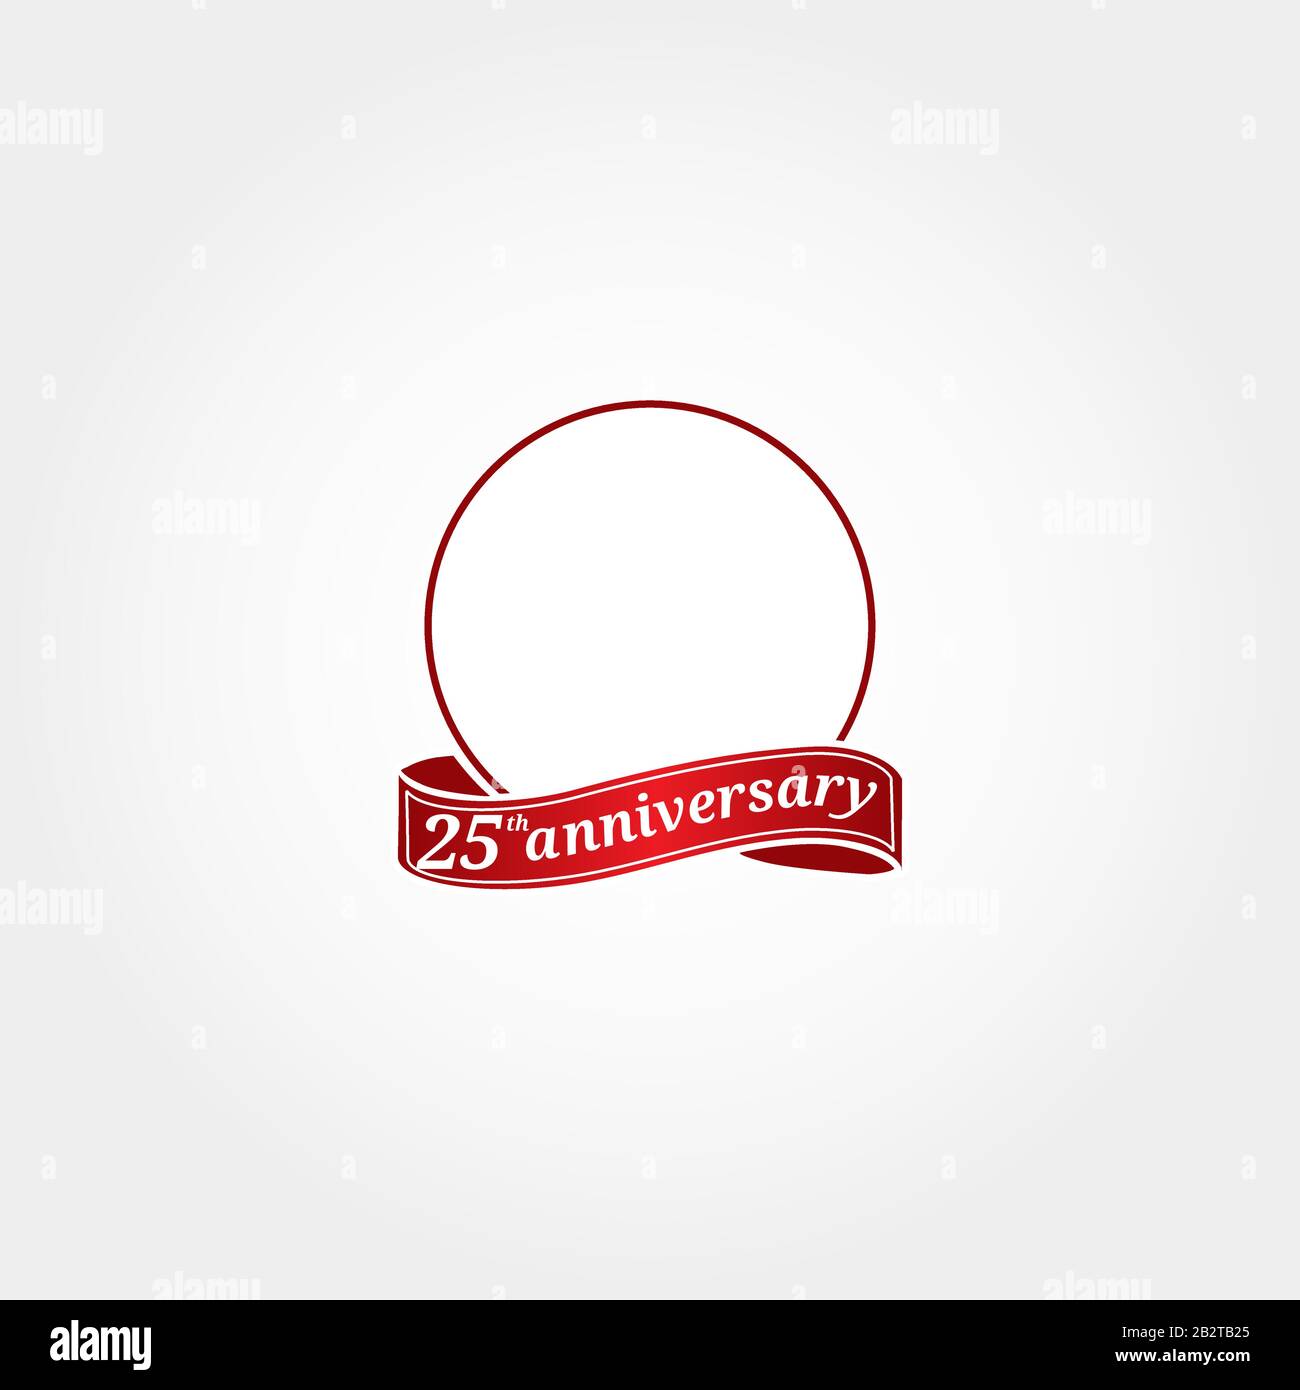 Template Logo 25th Anniversary With A Circle And The Number 25 In It